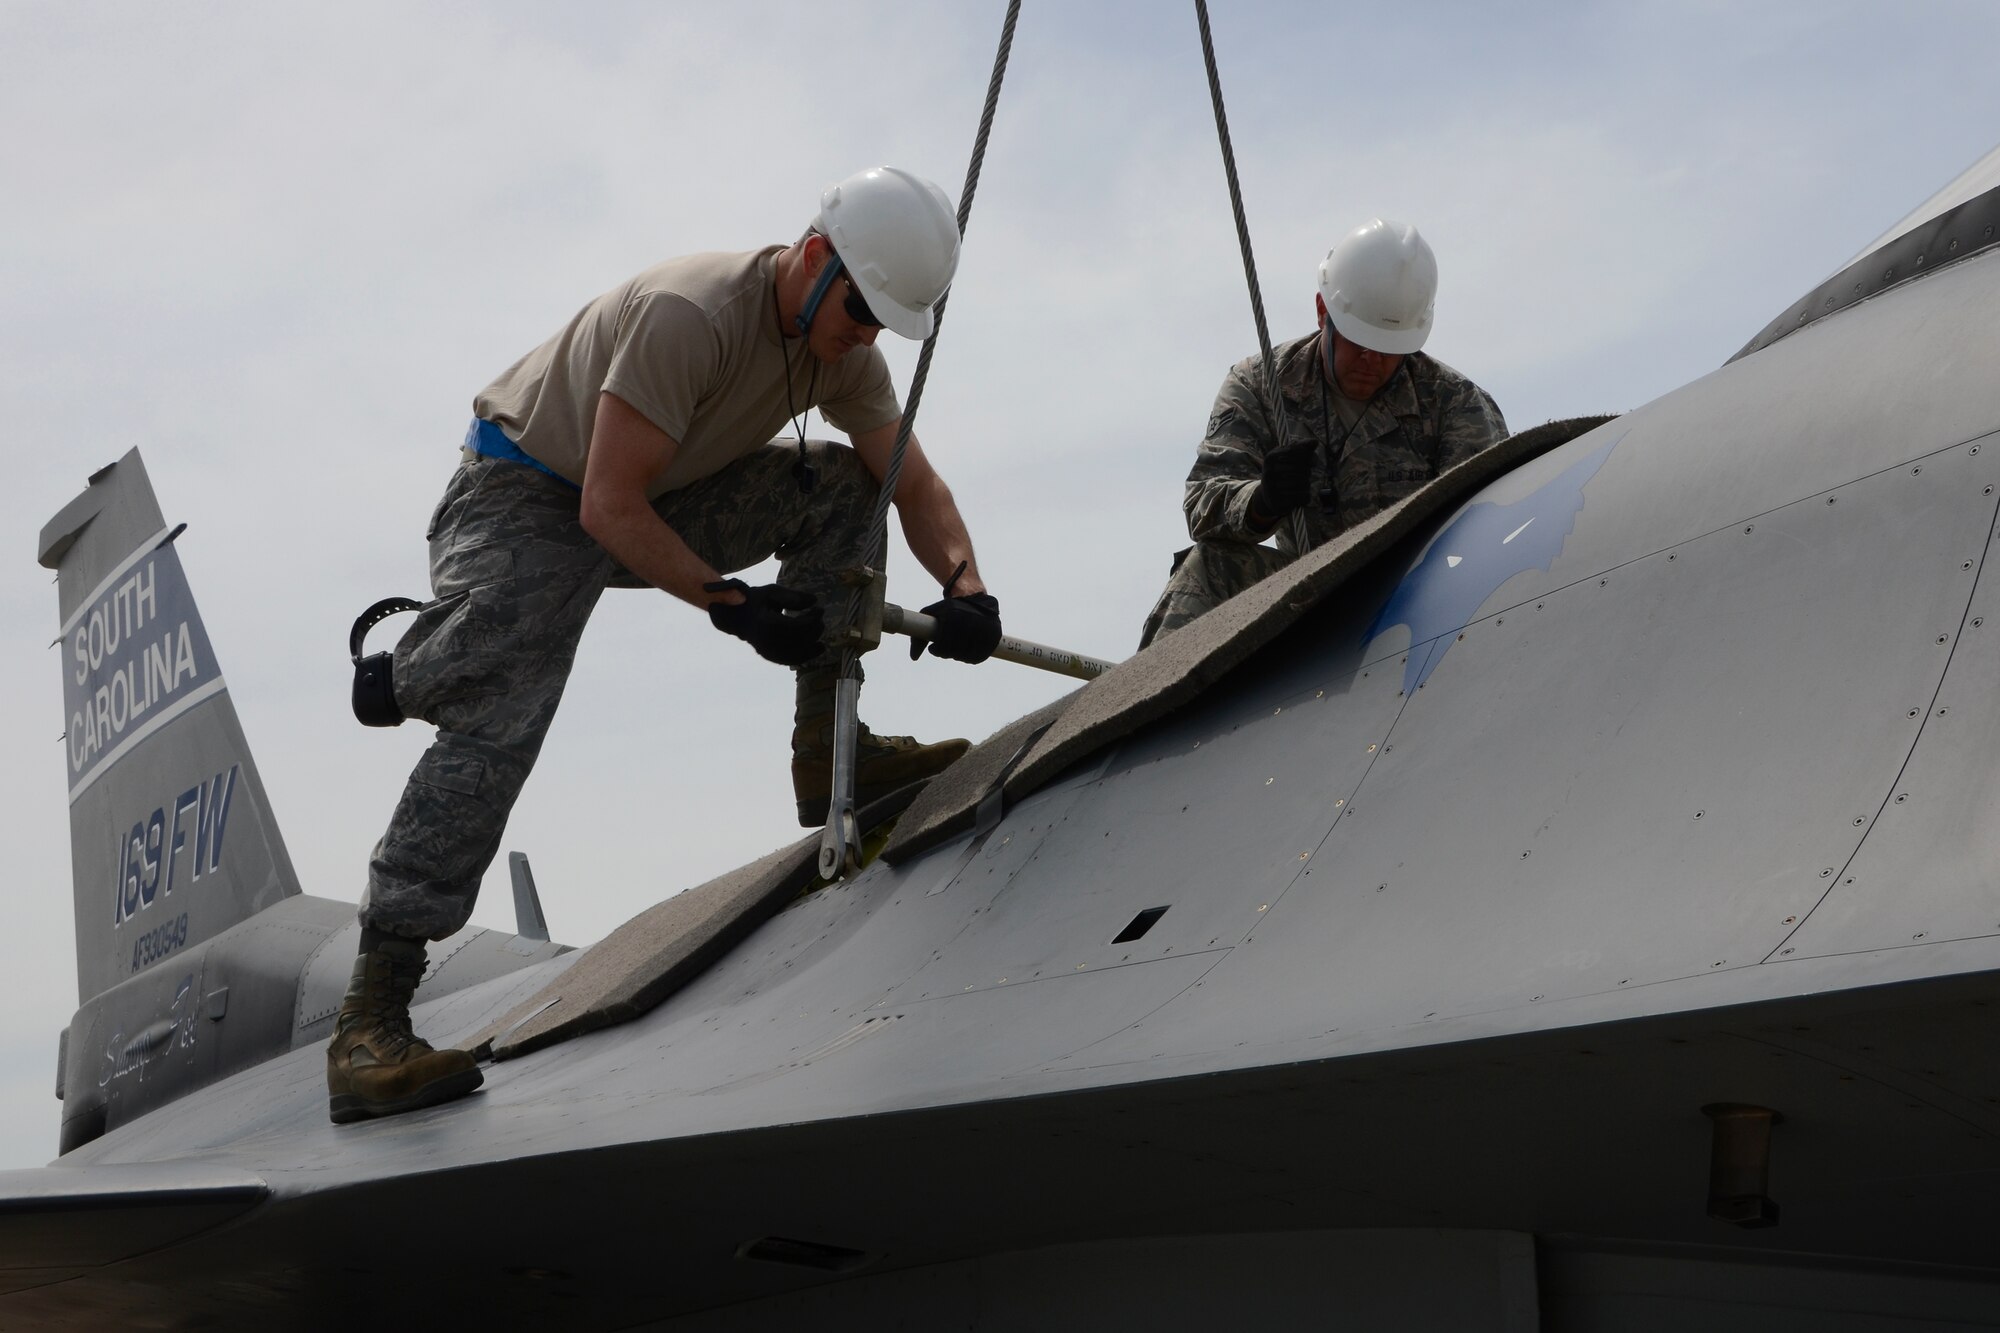 U.S. Air Force Tech. Sgt. Donald Murphy (left), and Airman 1st Class Clifford Derienzo (right), who are both crew chiefs with the 169th Maintenance Squadron attach a spreader bar to an aircraft hoisting sling during a Major Aircraft Recovery Exercise (MARE) May 6, 2015 at McEntire Joint National Guard Base, S.C. The MARE exercise was a base-wide training simulation to determine how McEntire would respond to an aircraft crash. (U.S. National Guard photo by Amn Megan Floyd/Released)